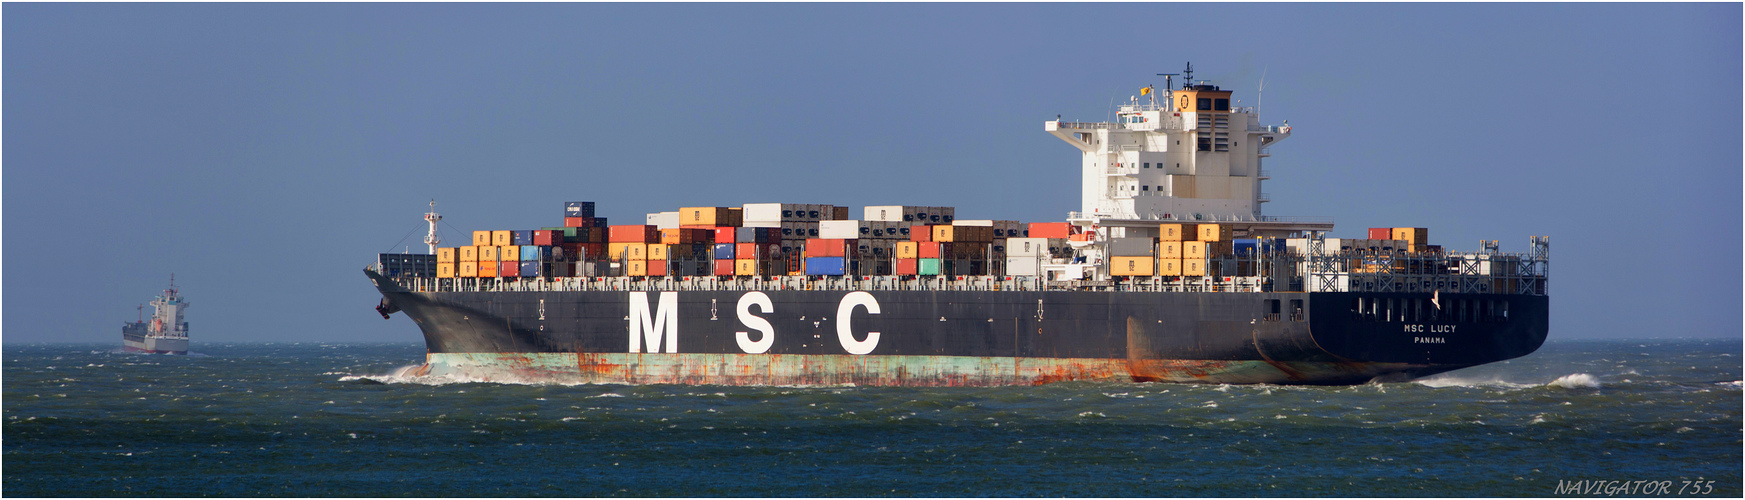 MSC LUCY / Container ship / Maasmond /Rotterdam /